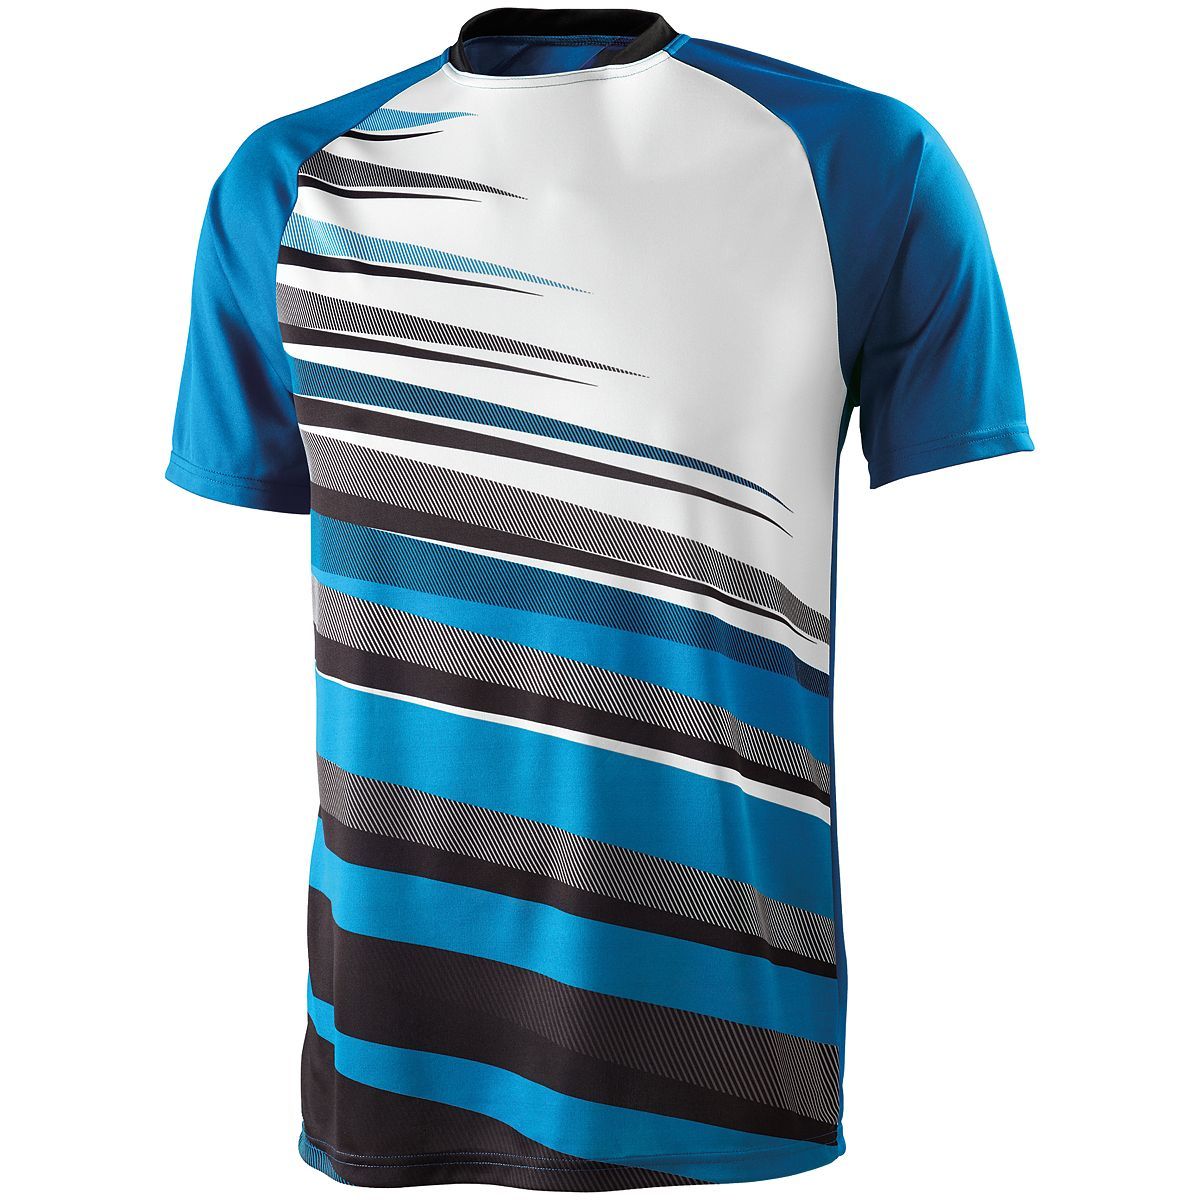 High 5 Adult Galactic Jersey in Power Blue/Black/White  -Part of the Adult, Adult-Jersey, High5-Products, Soccer, Shirts, All-Sports-1 product lines at KanaleyCreations.com